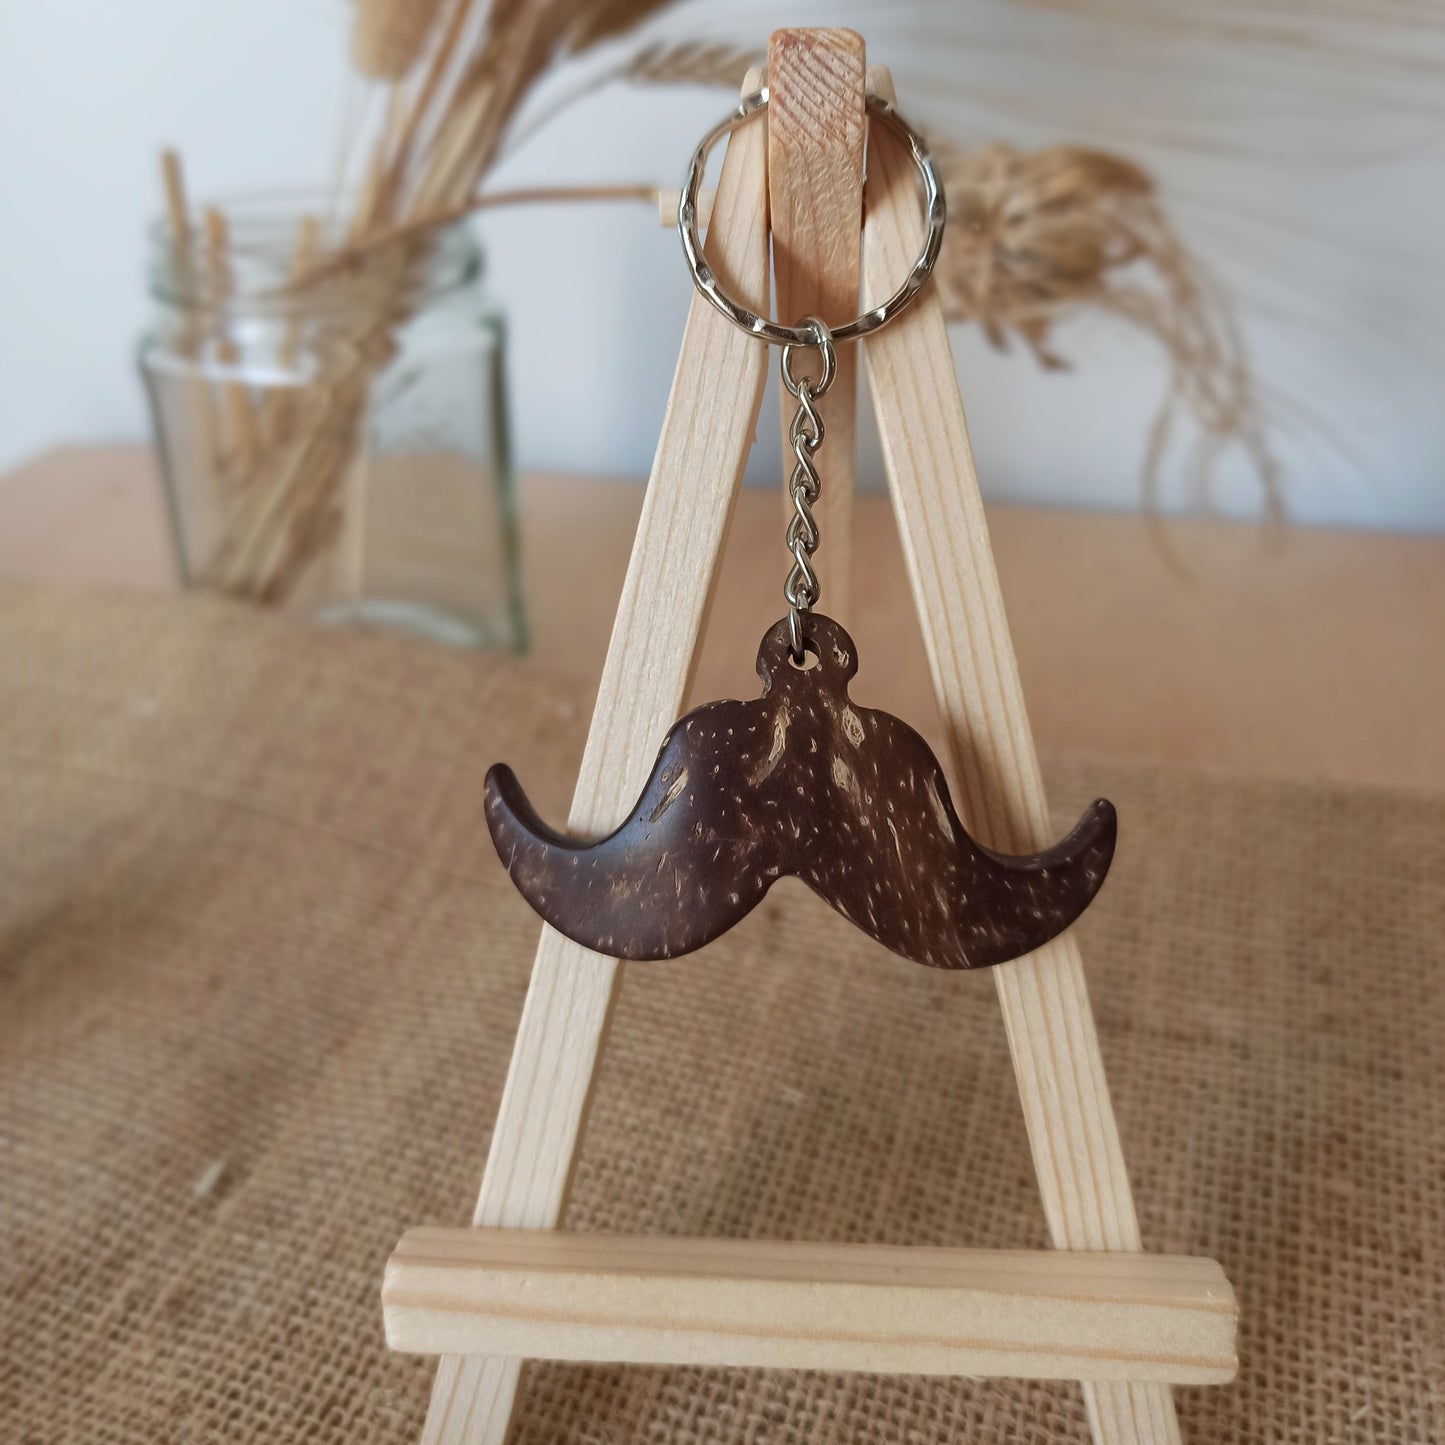 Moustache Coconut Shell Key Chain in aid of Movember, Prostate Cancer, Testicular Cancer. Men's Health